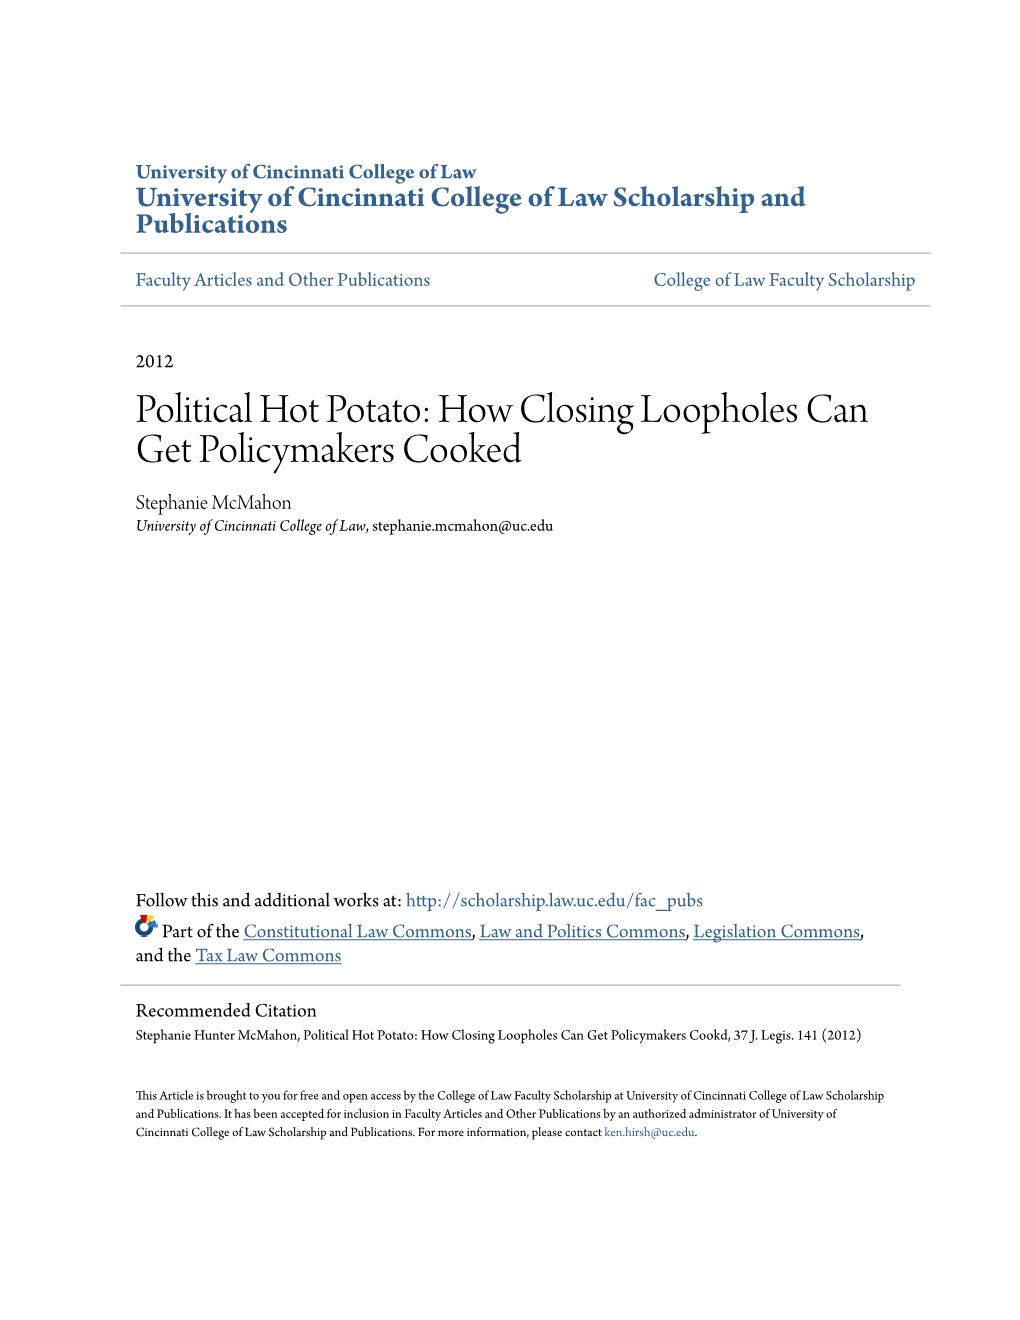 Political Hot Potato: How Closing Loopholes Can Get Policymakers Cooked Stephanie Mcmahon University of Cincinnati College of Law, Stephanie.Mcmahon@Uc.Edu